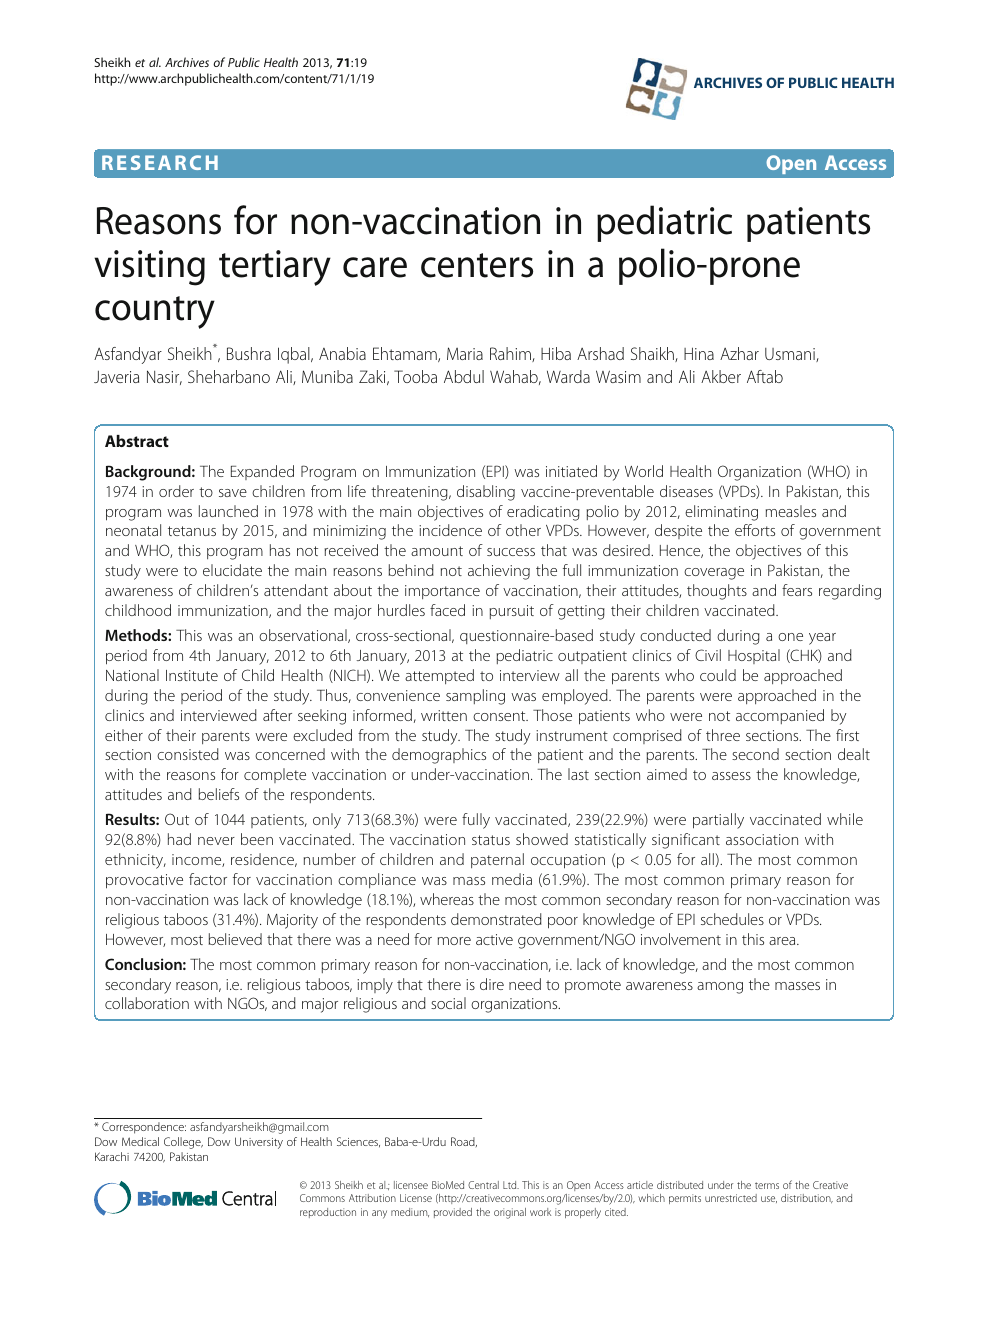 Reasons For Non Vaccination In Pediatric Patients Visiting